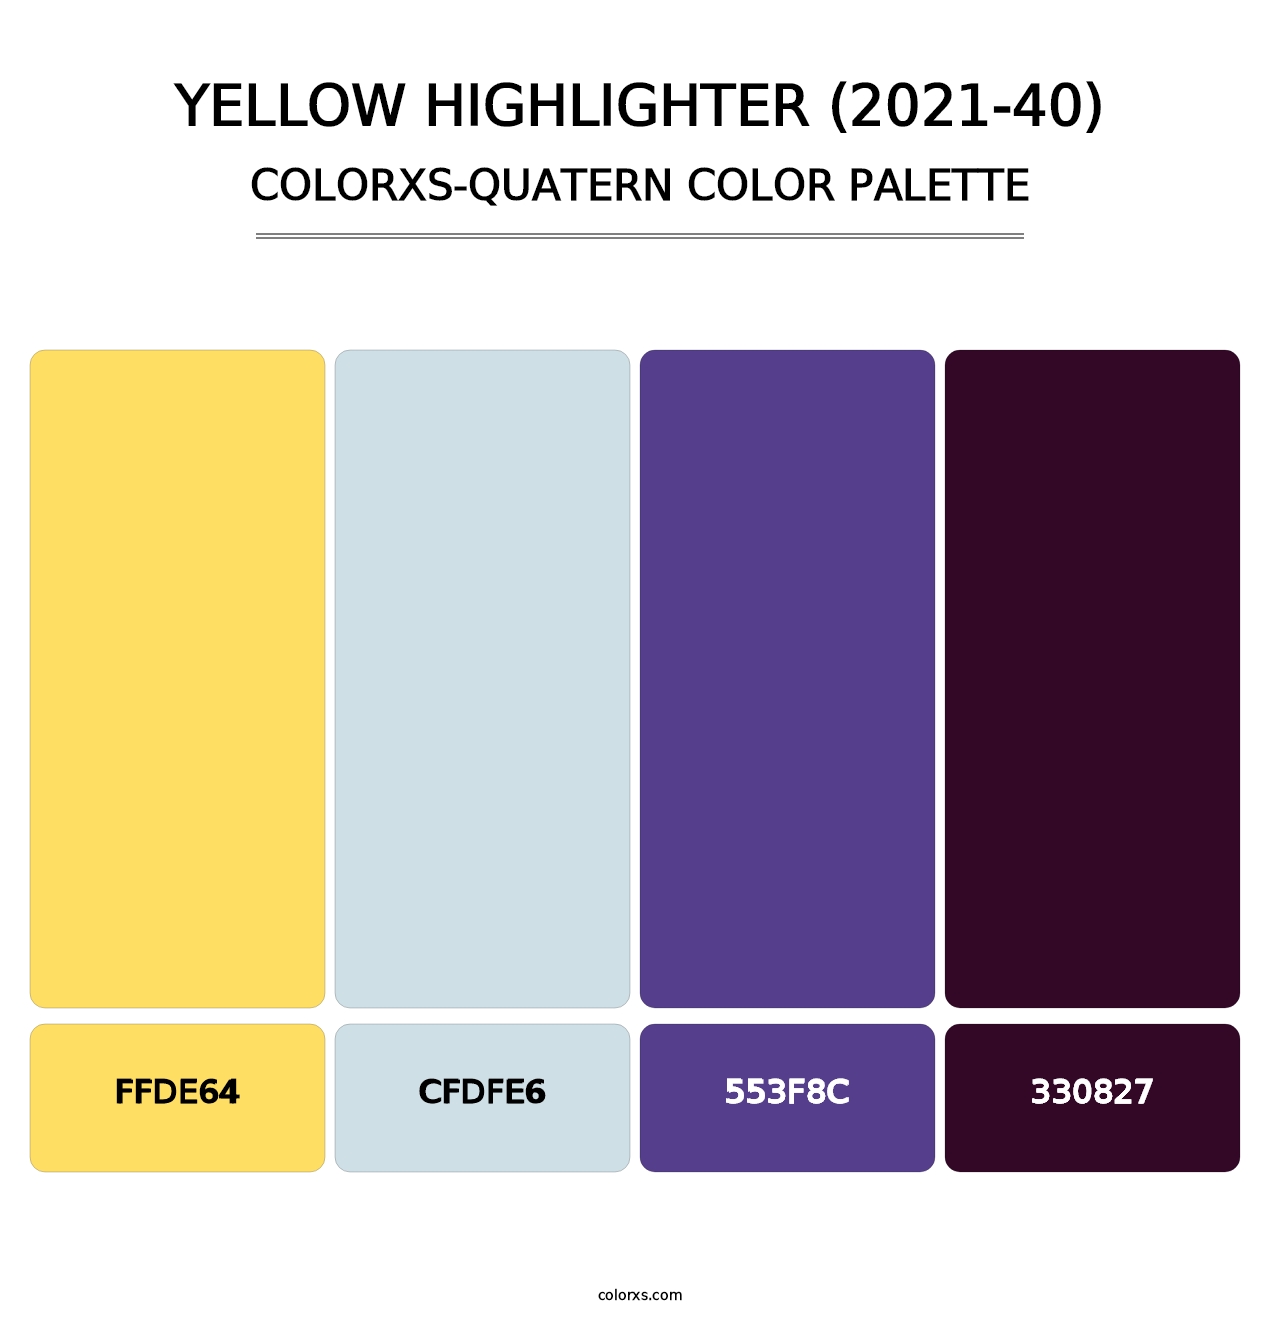 Yellow Highlighter (2021-40) - Colorxs Quatern Palette